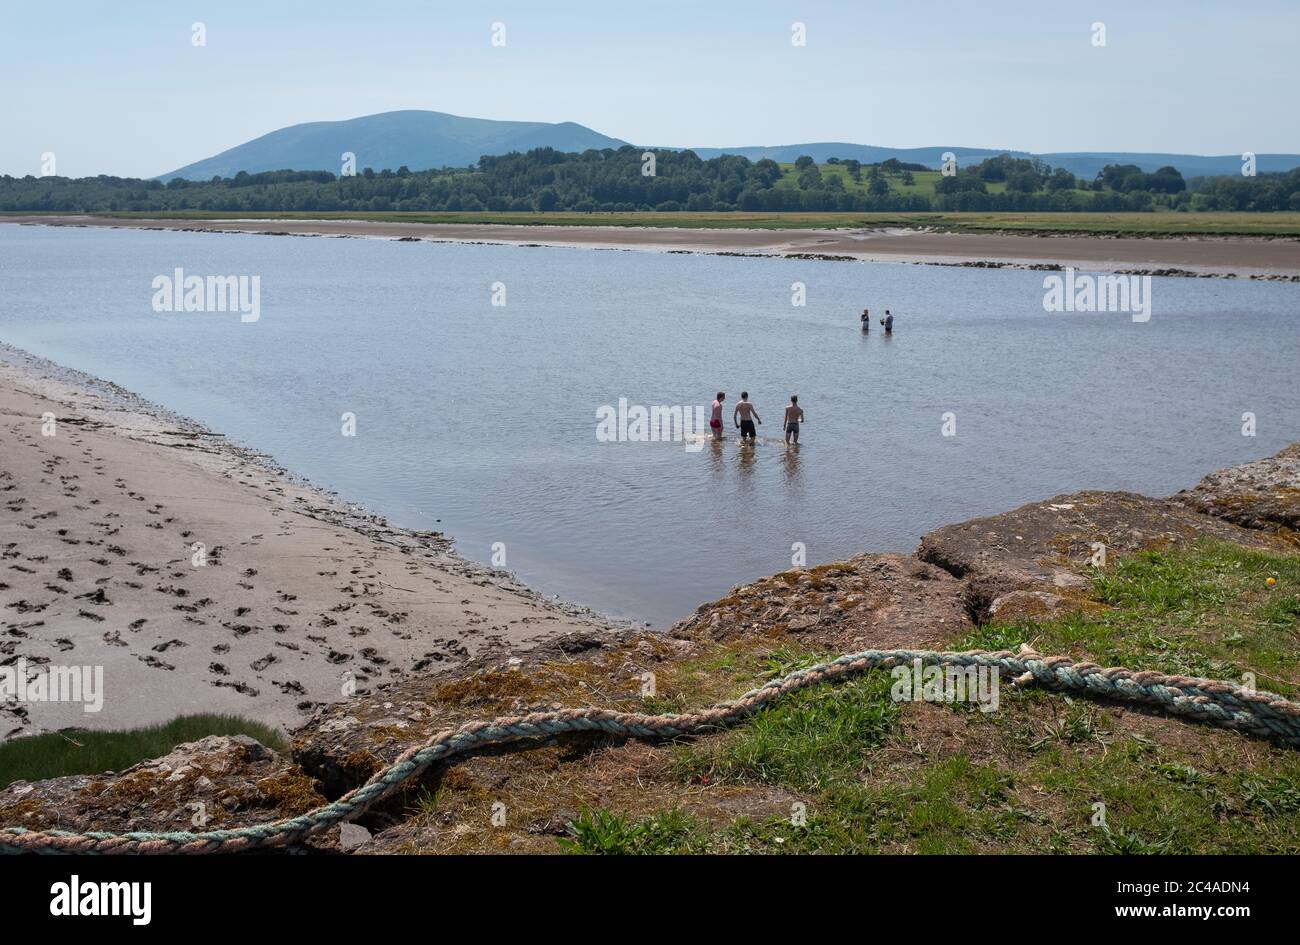 25th June, 2020, Glencaple, Scotland. People walk across the River Nith while the water level is low due to dry weather, taking a huge risk. Stock Photo